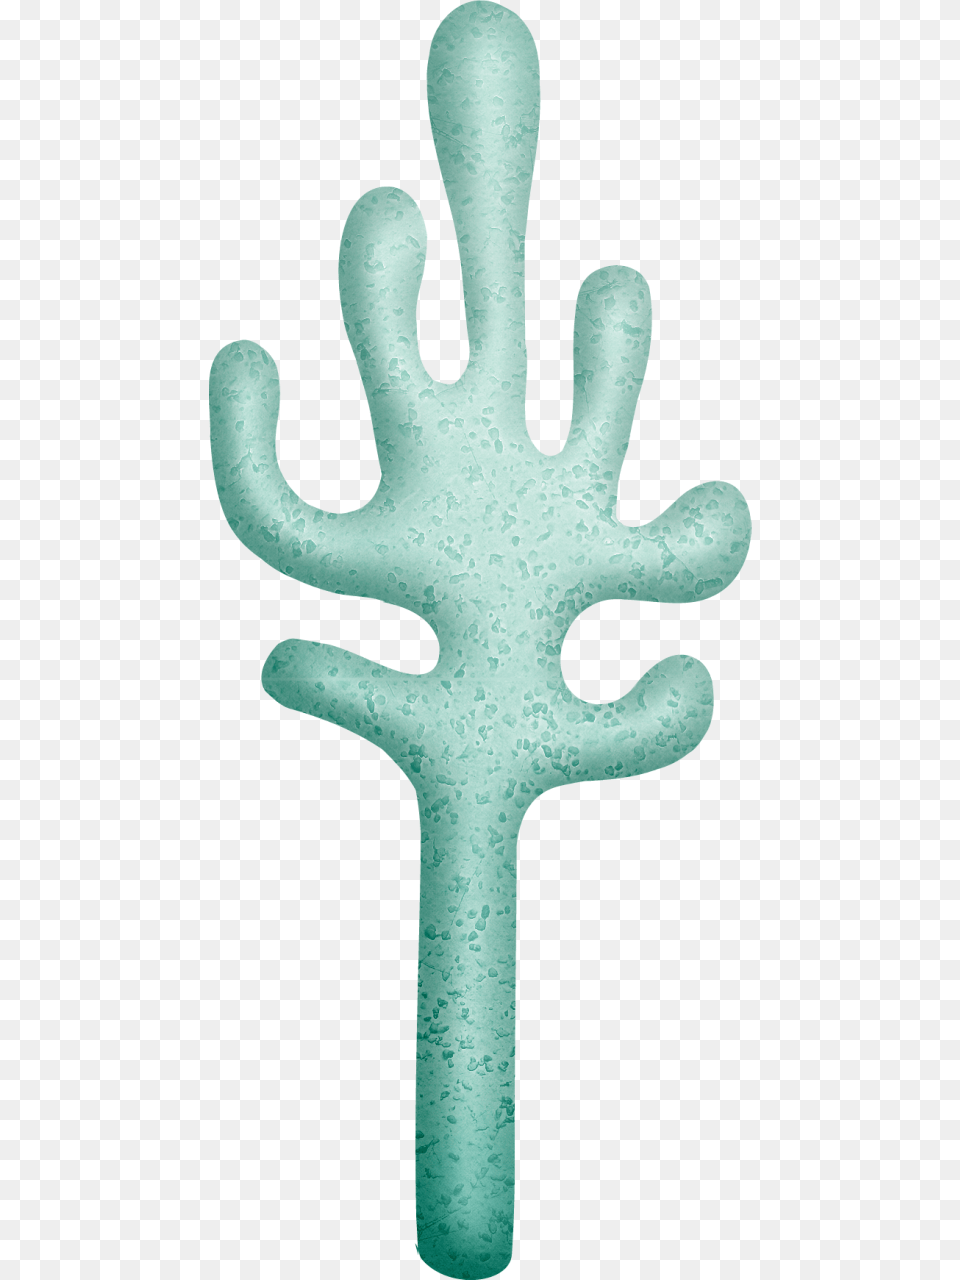 Coral 2 Coral, Clothing, Glove, Turquoise, Nature Png